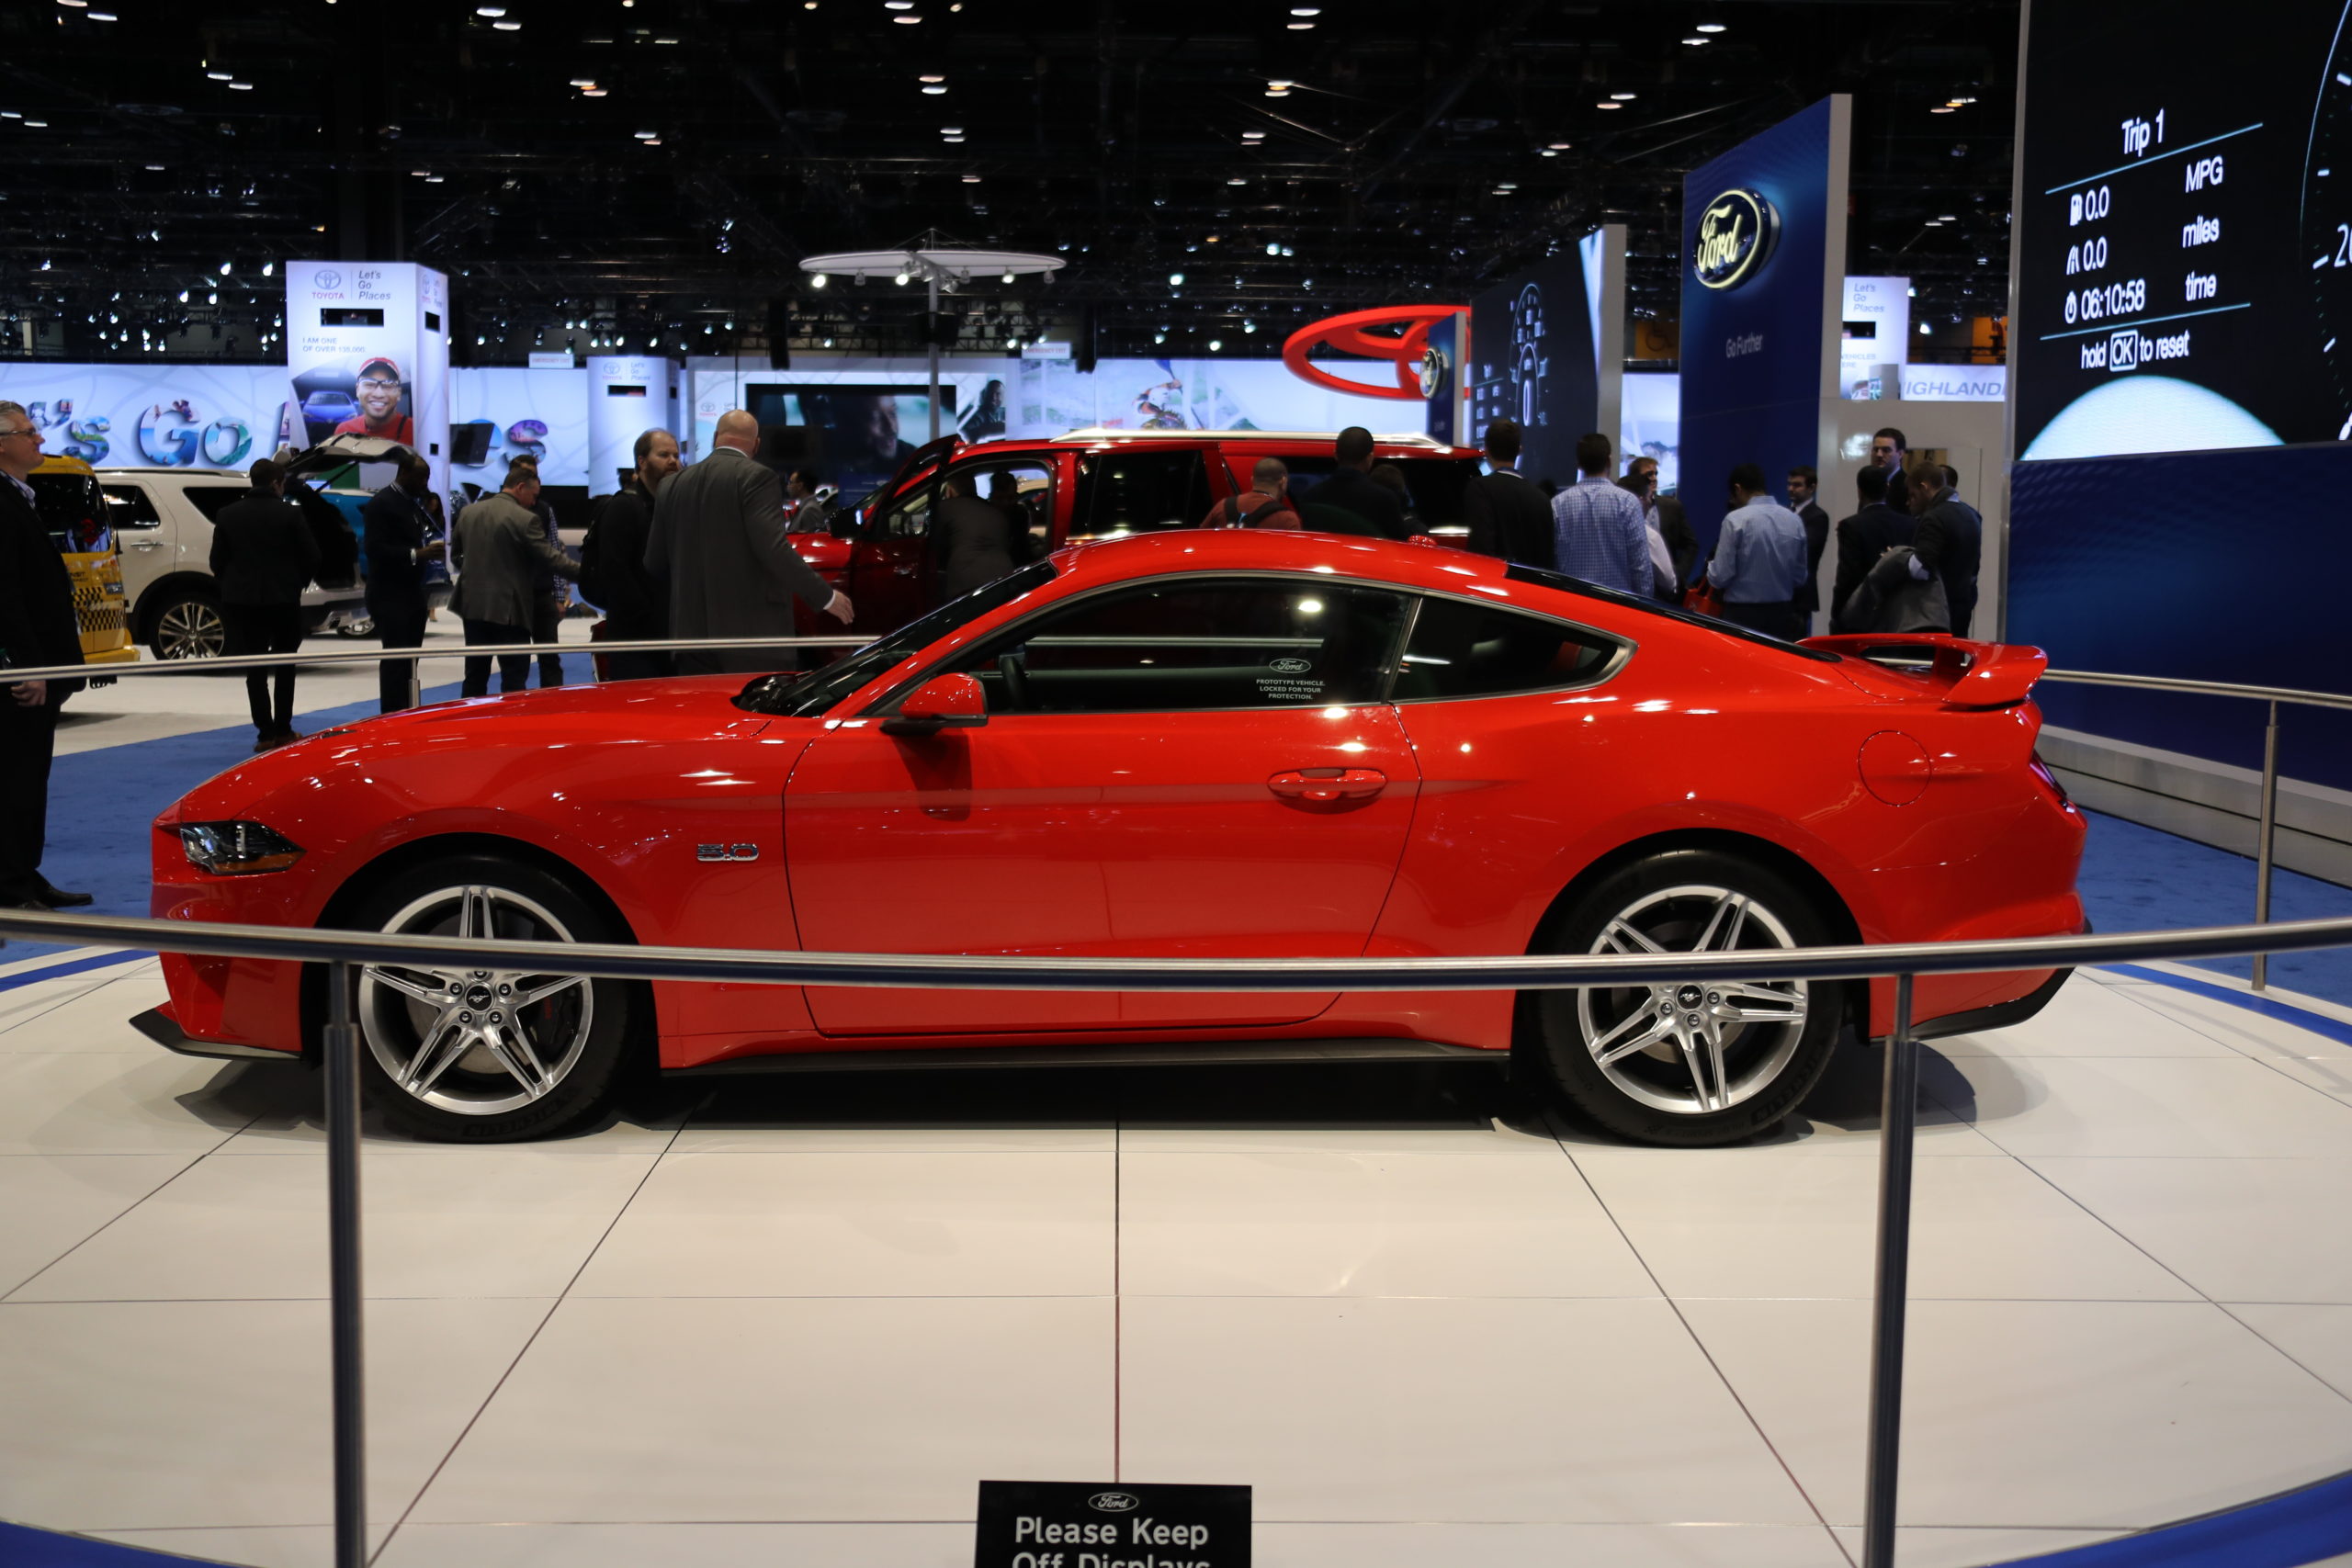 Stare At The 2018 Ford Mustang And Decide If It’s An Improvement